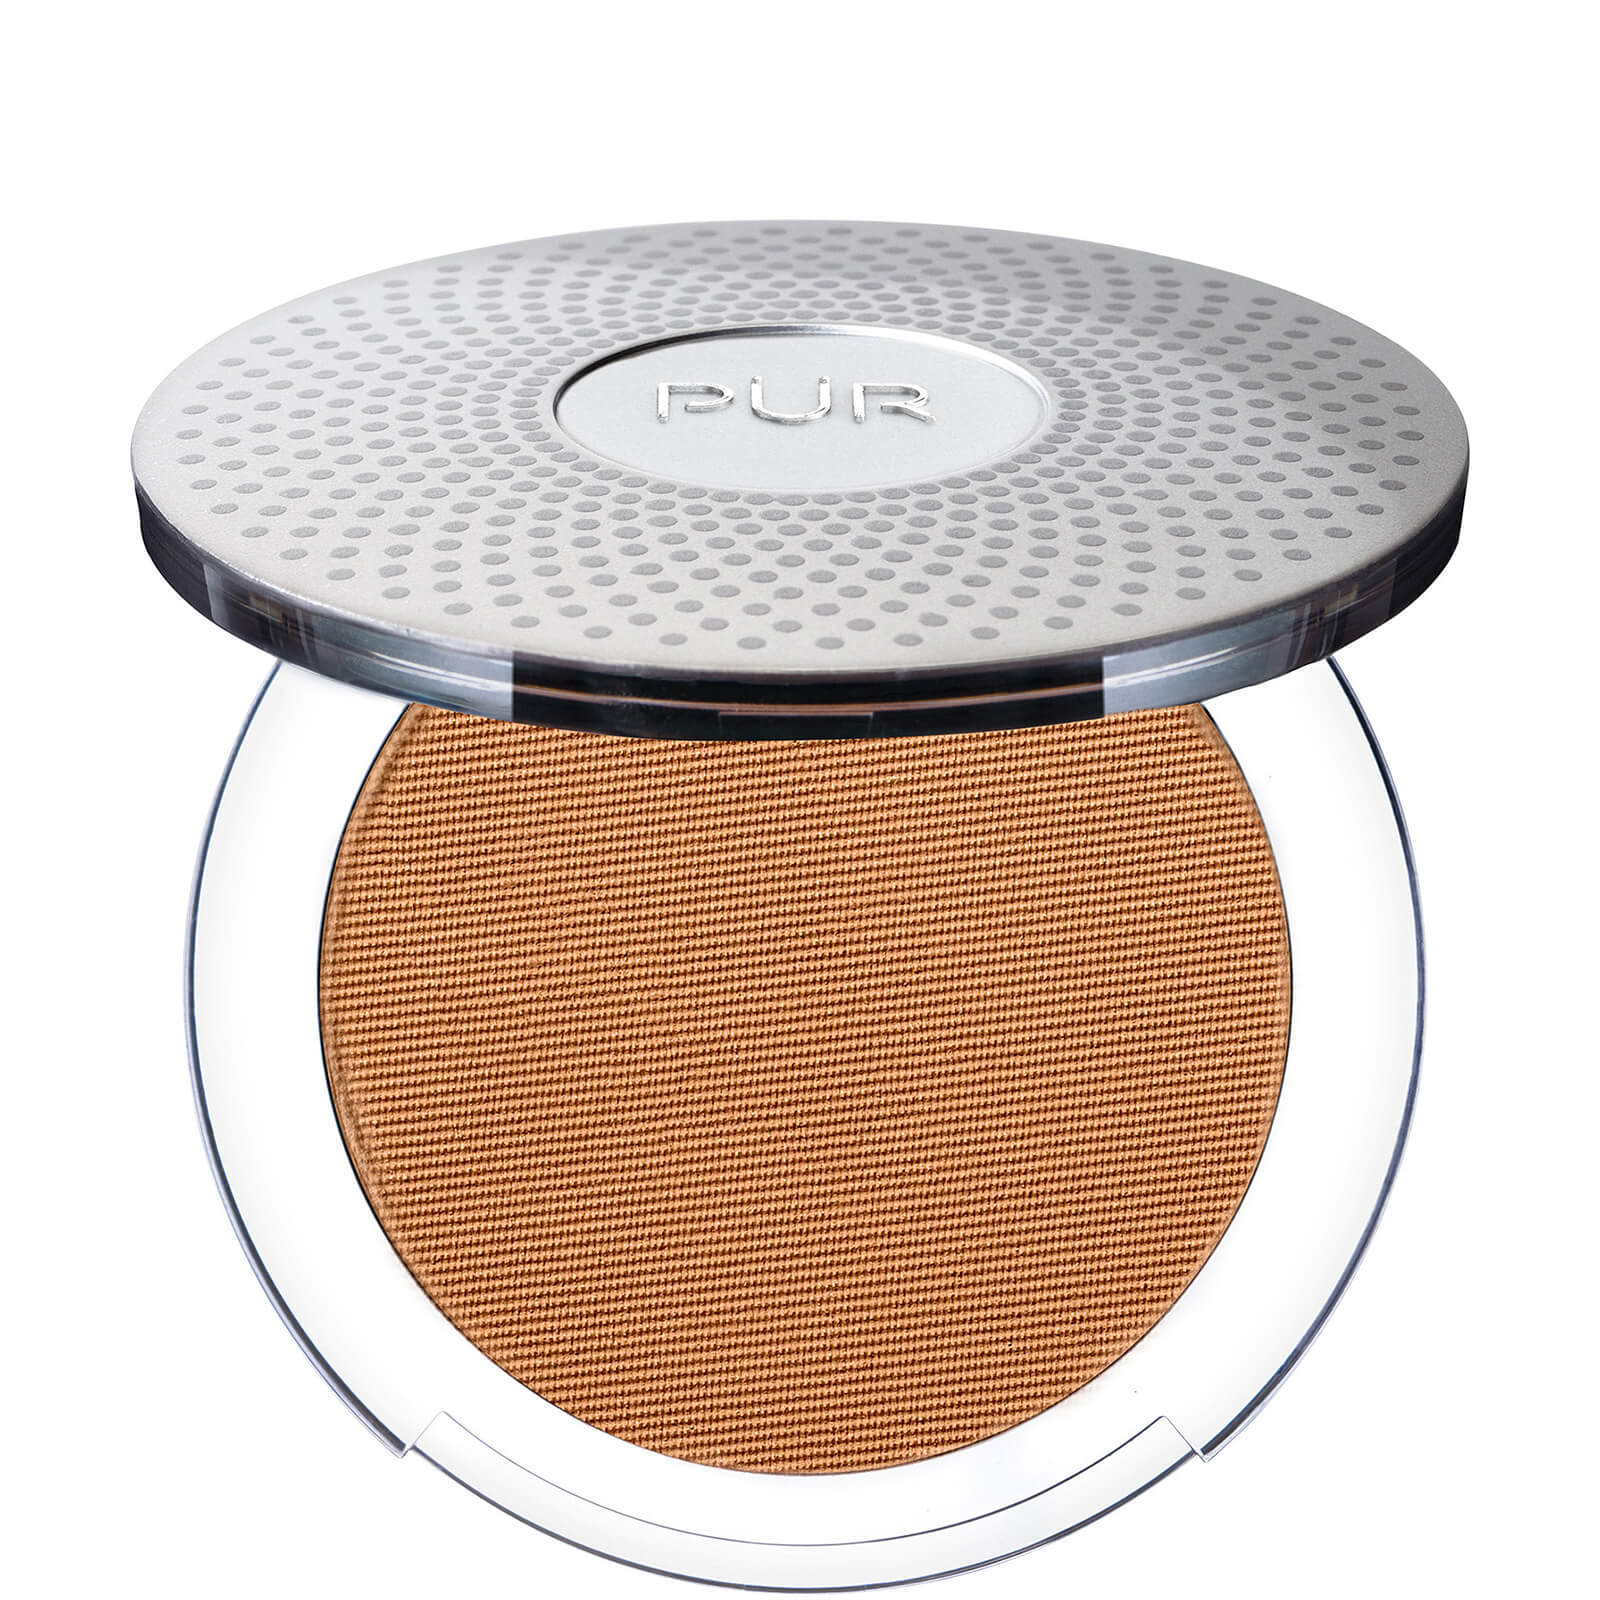 Pür 4-in-1 Pressed Mineral Make-up 8g (various Shades) In Dn2/nutmeg